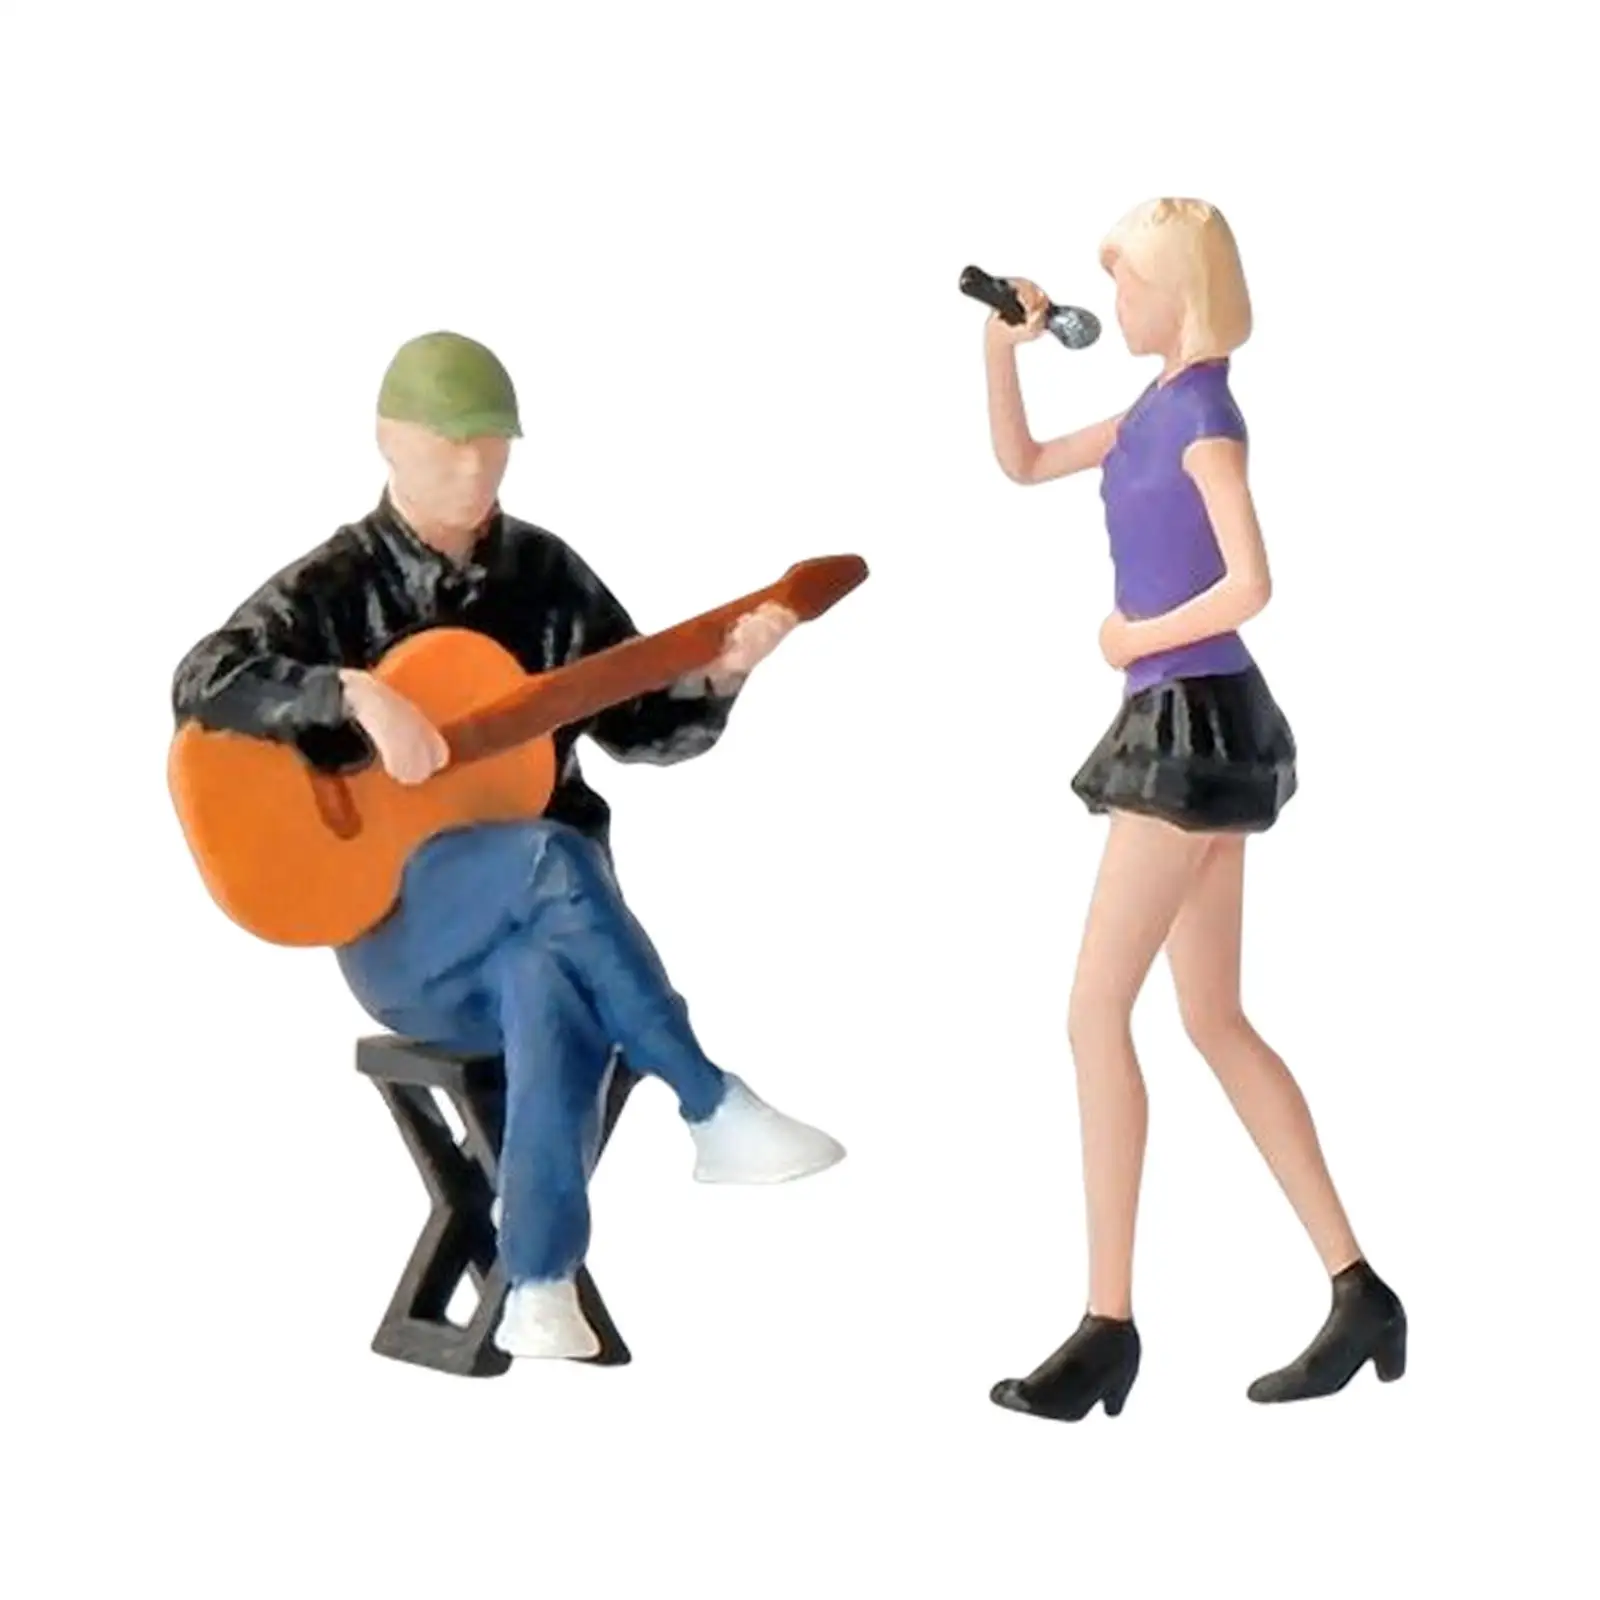 1/64 Guitarist and Singer Figures Hand Painted Miniature Figures Model for Scenery Landscape Decor